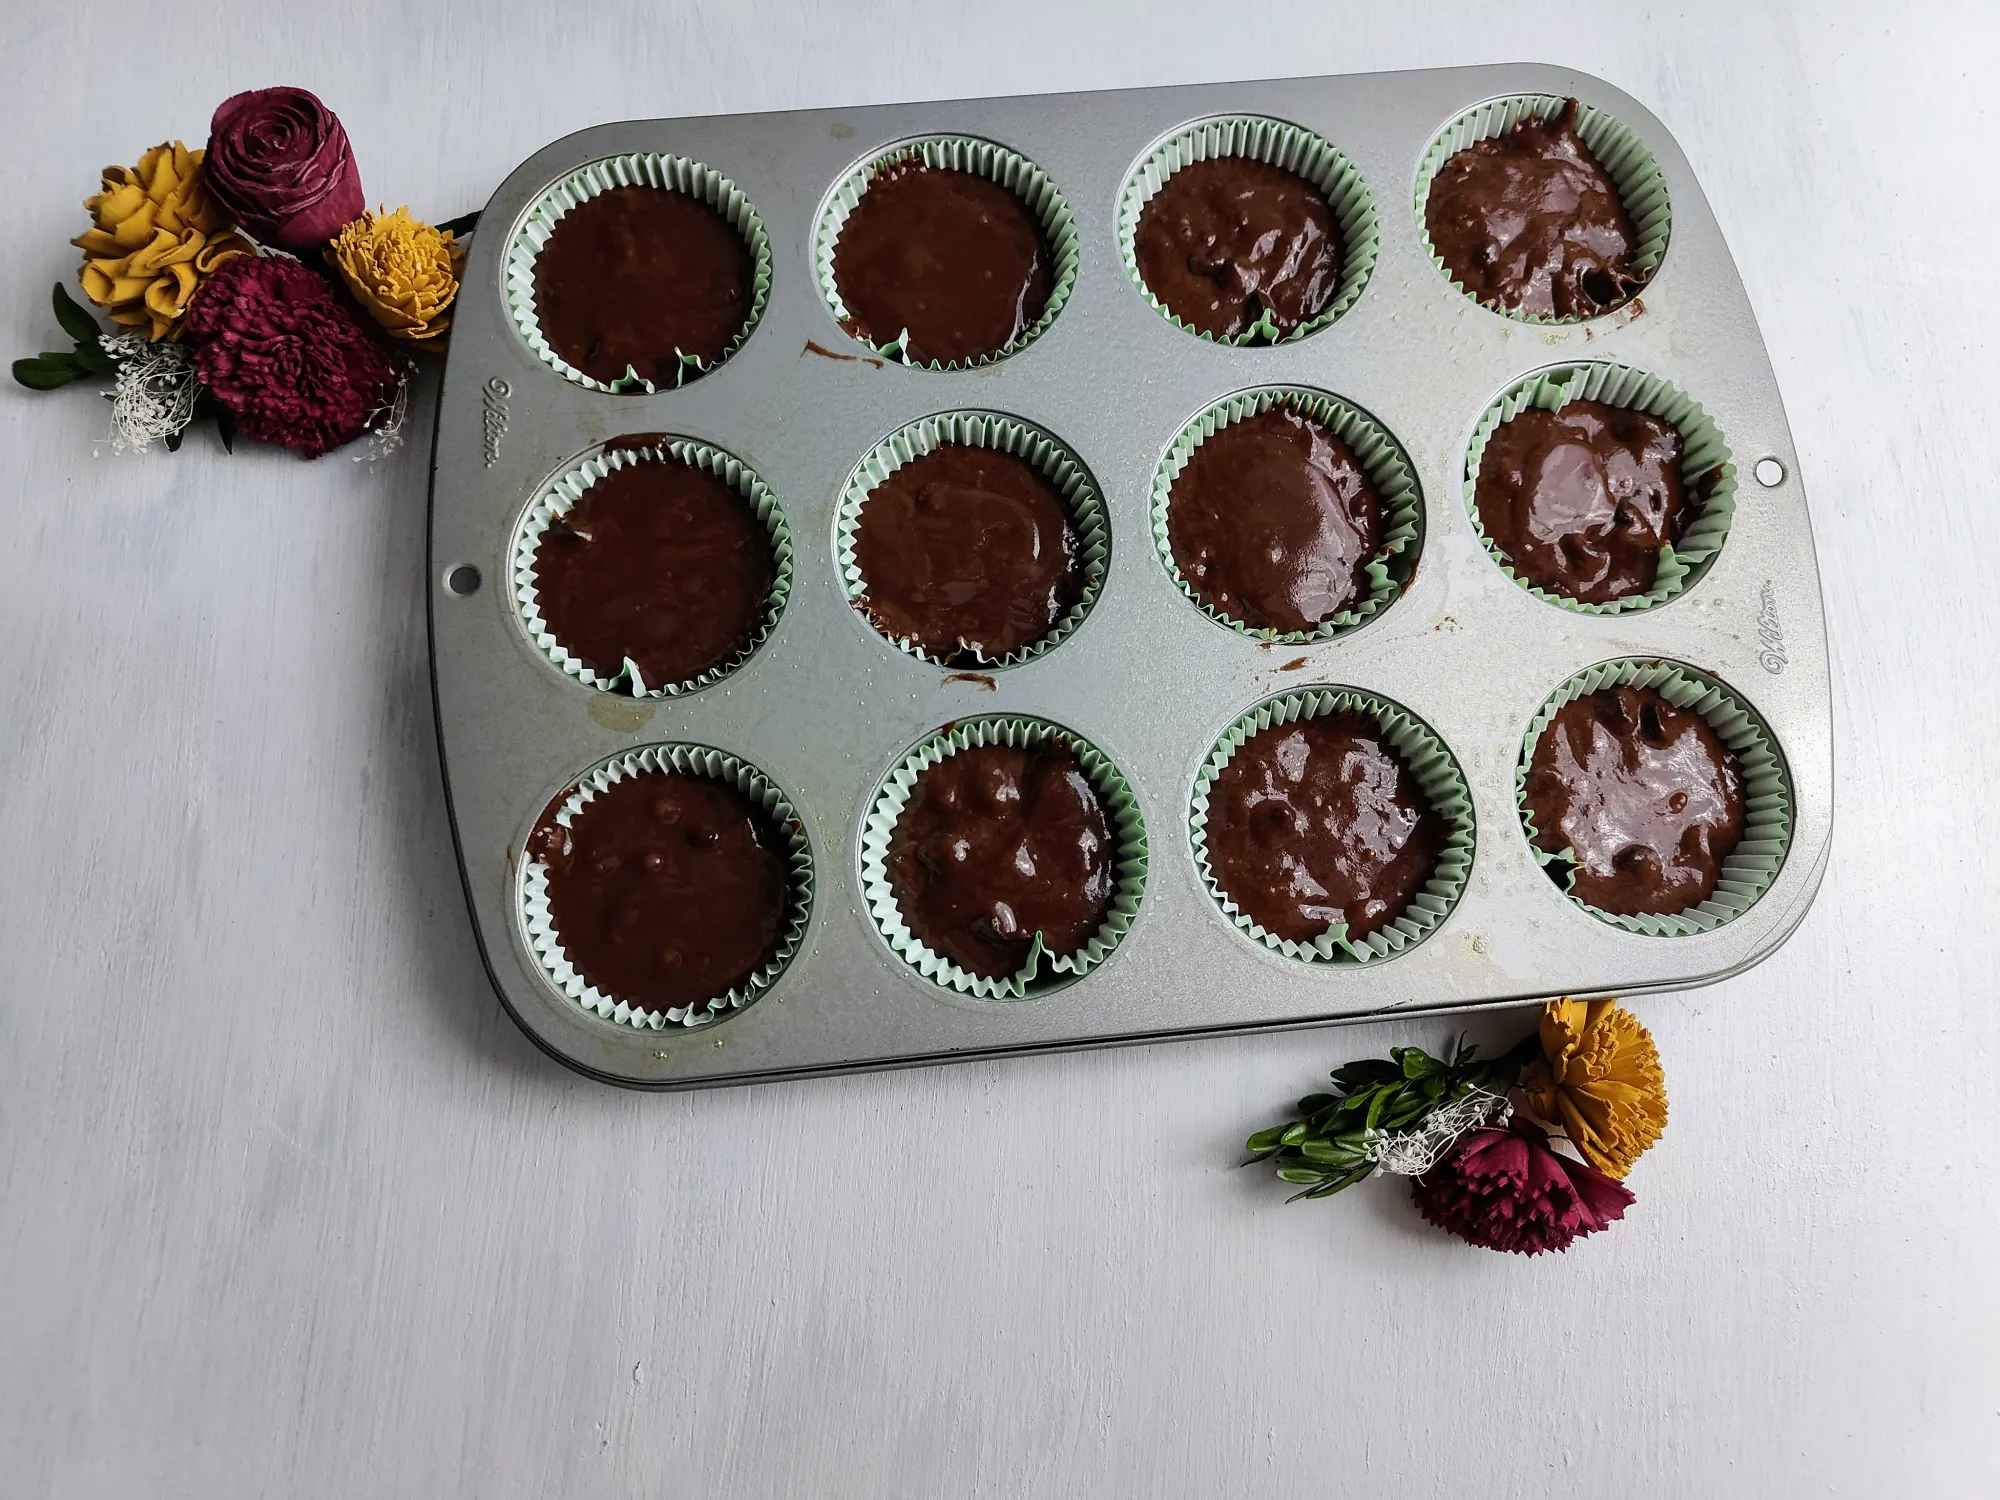 A muffin tin filled with chocolate batter